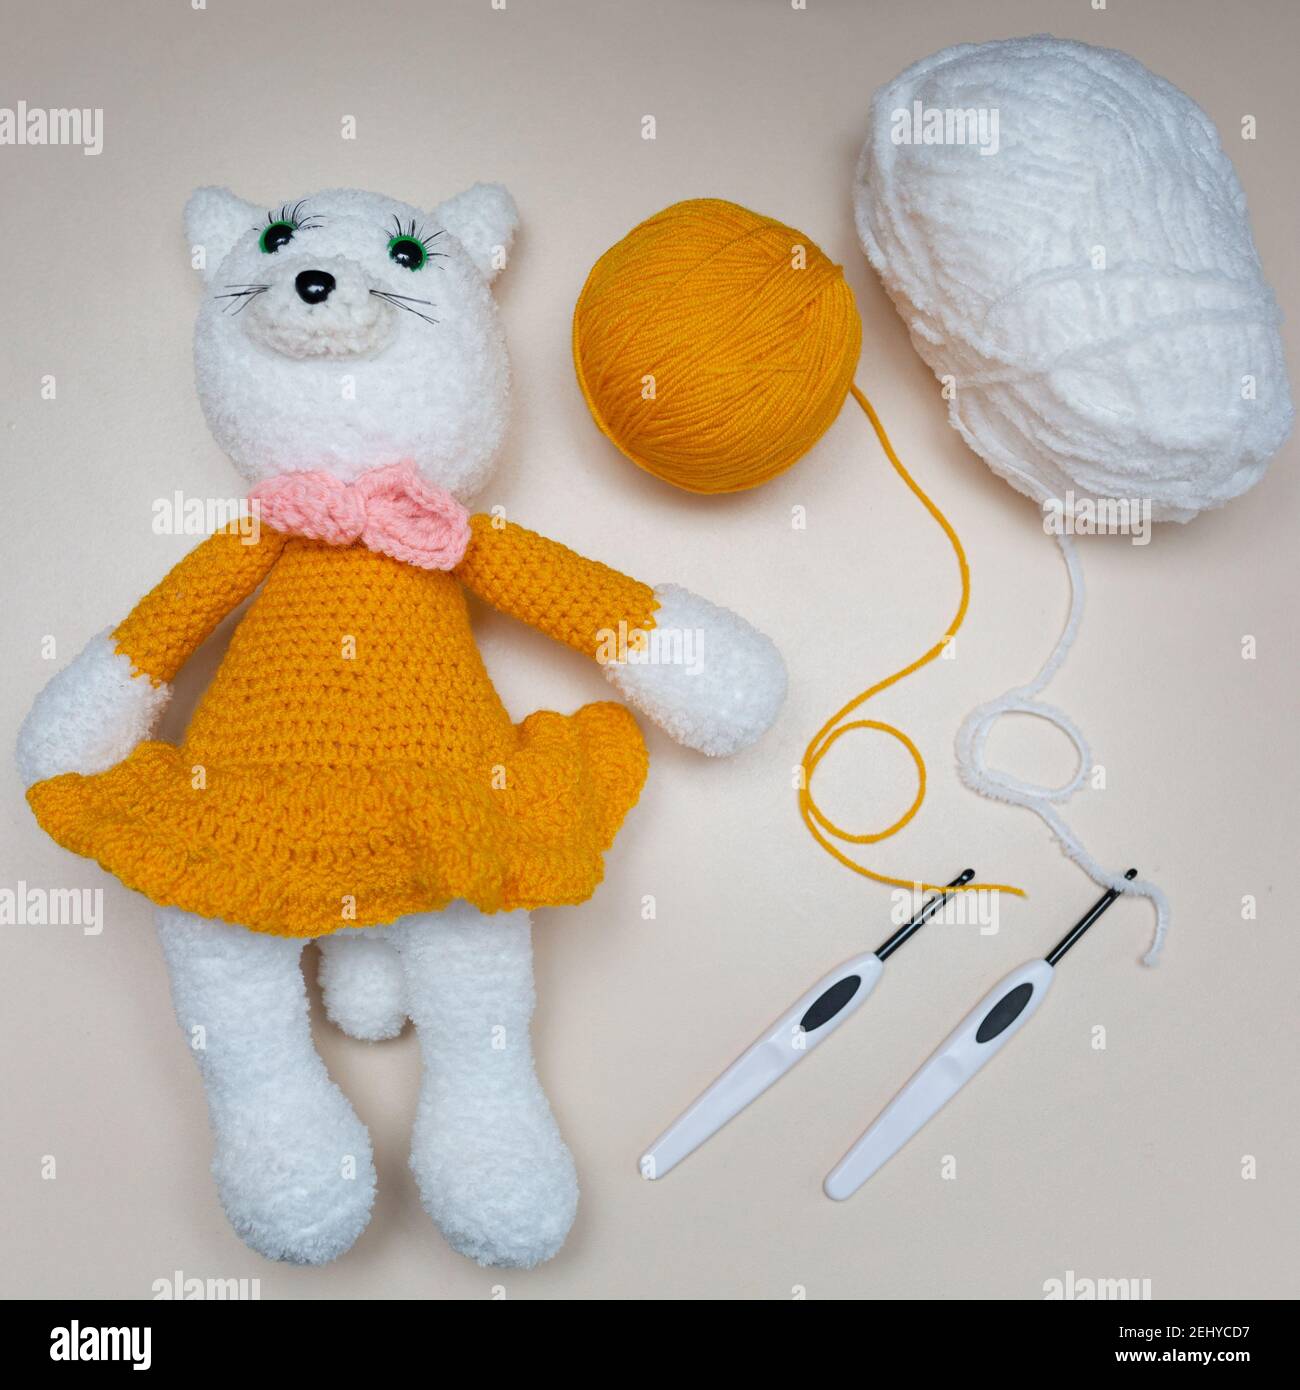 Handmade knitted toy. Toy white mouse in an orange skirt with knitting needles on a gray background. Crocheted stuffed animals. Stock Photo